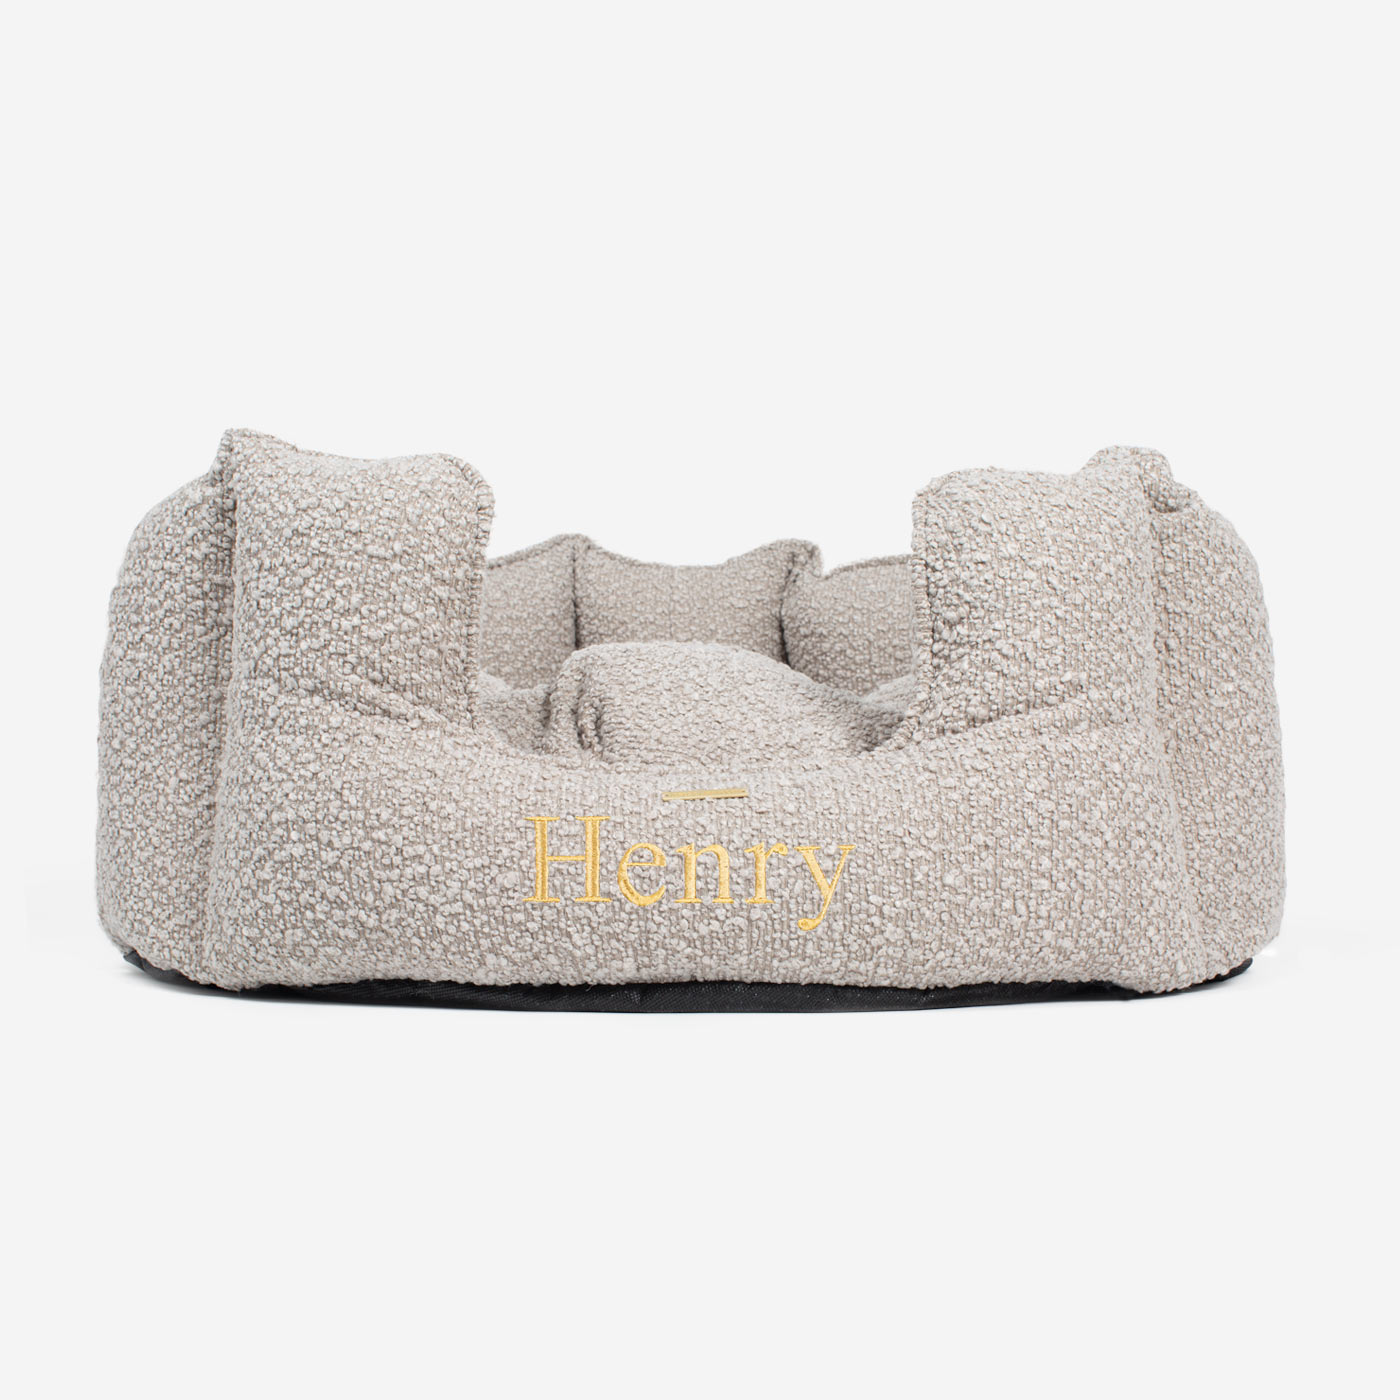  Discover Our Luxurious High Wall Bed For Cats & Kittens, Featuring inner pillow with plush teddy fleece on one side To Craft The Perfect Cat Bed In Stunning Mink Boucle! Available To Personalize Now at Lords & Labradors US